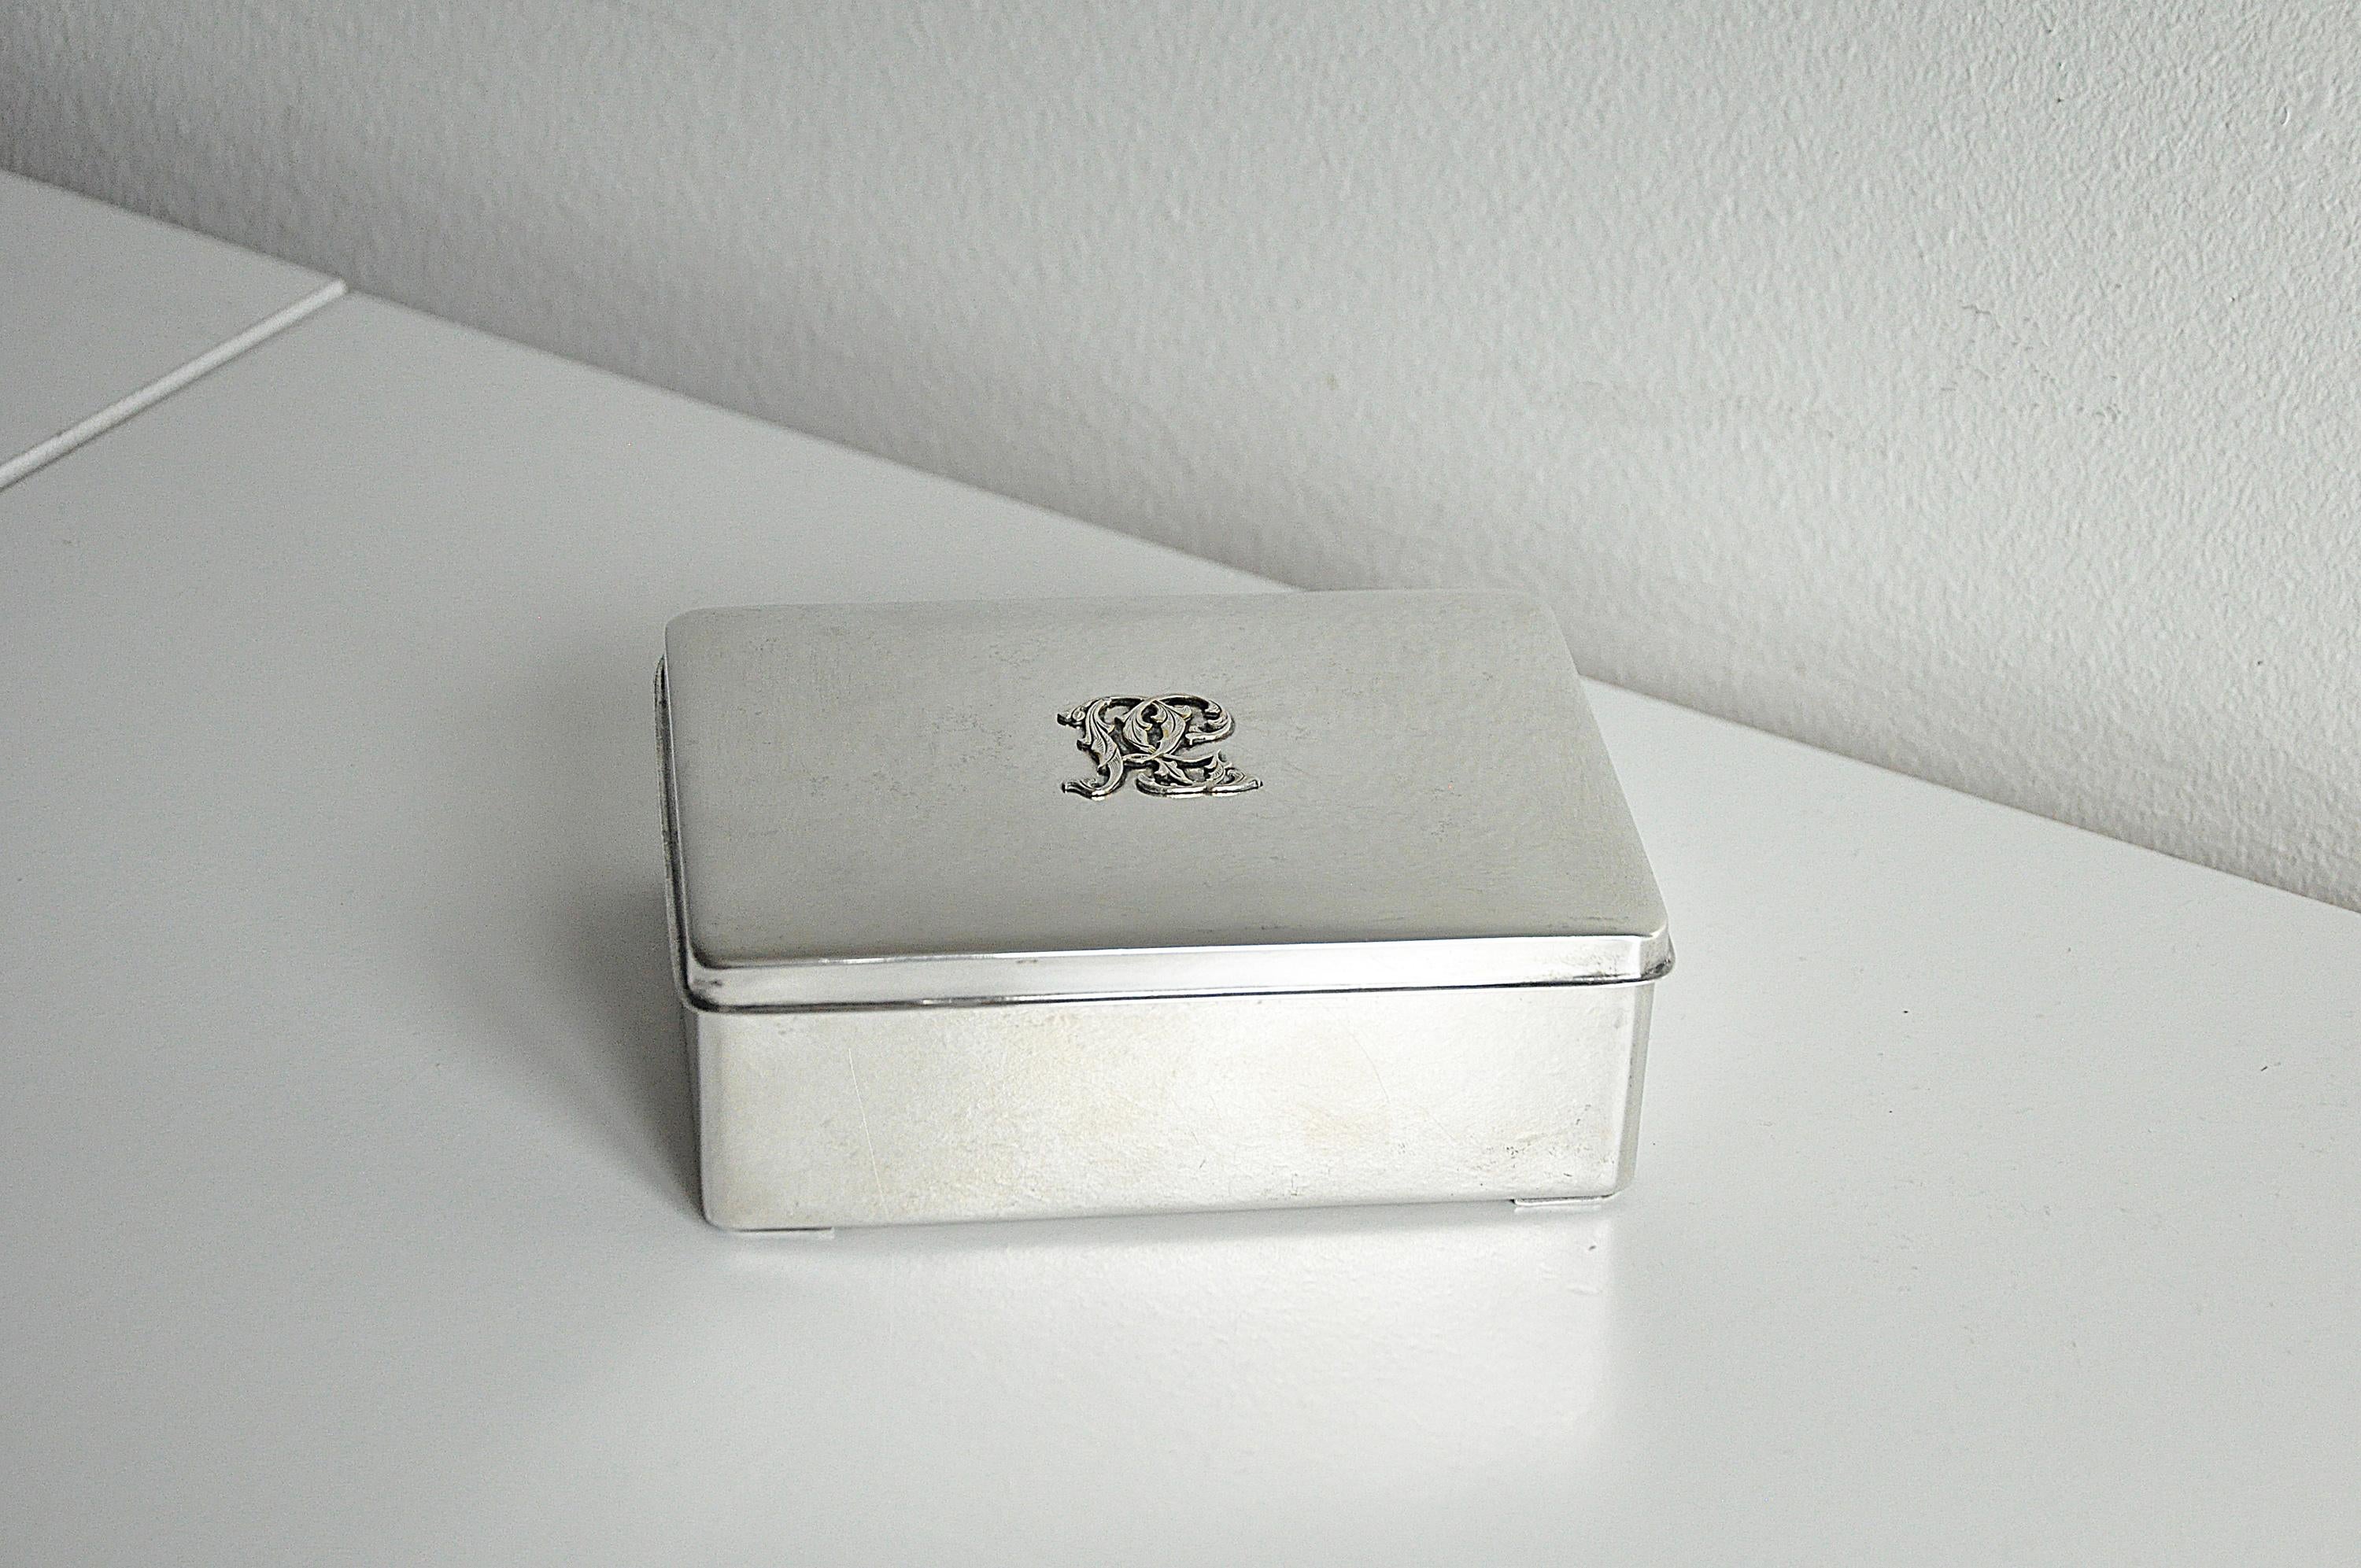 Beautiful Scandinavian Modern box in silver from C. G. Hallberg, Sweden -1937.
Decorated with a beautiful monogram RG.
Signed with makers mark.
Good vintage condition, wear and patina consistent with age and use. 
Scratches. Signes of wear